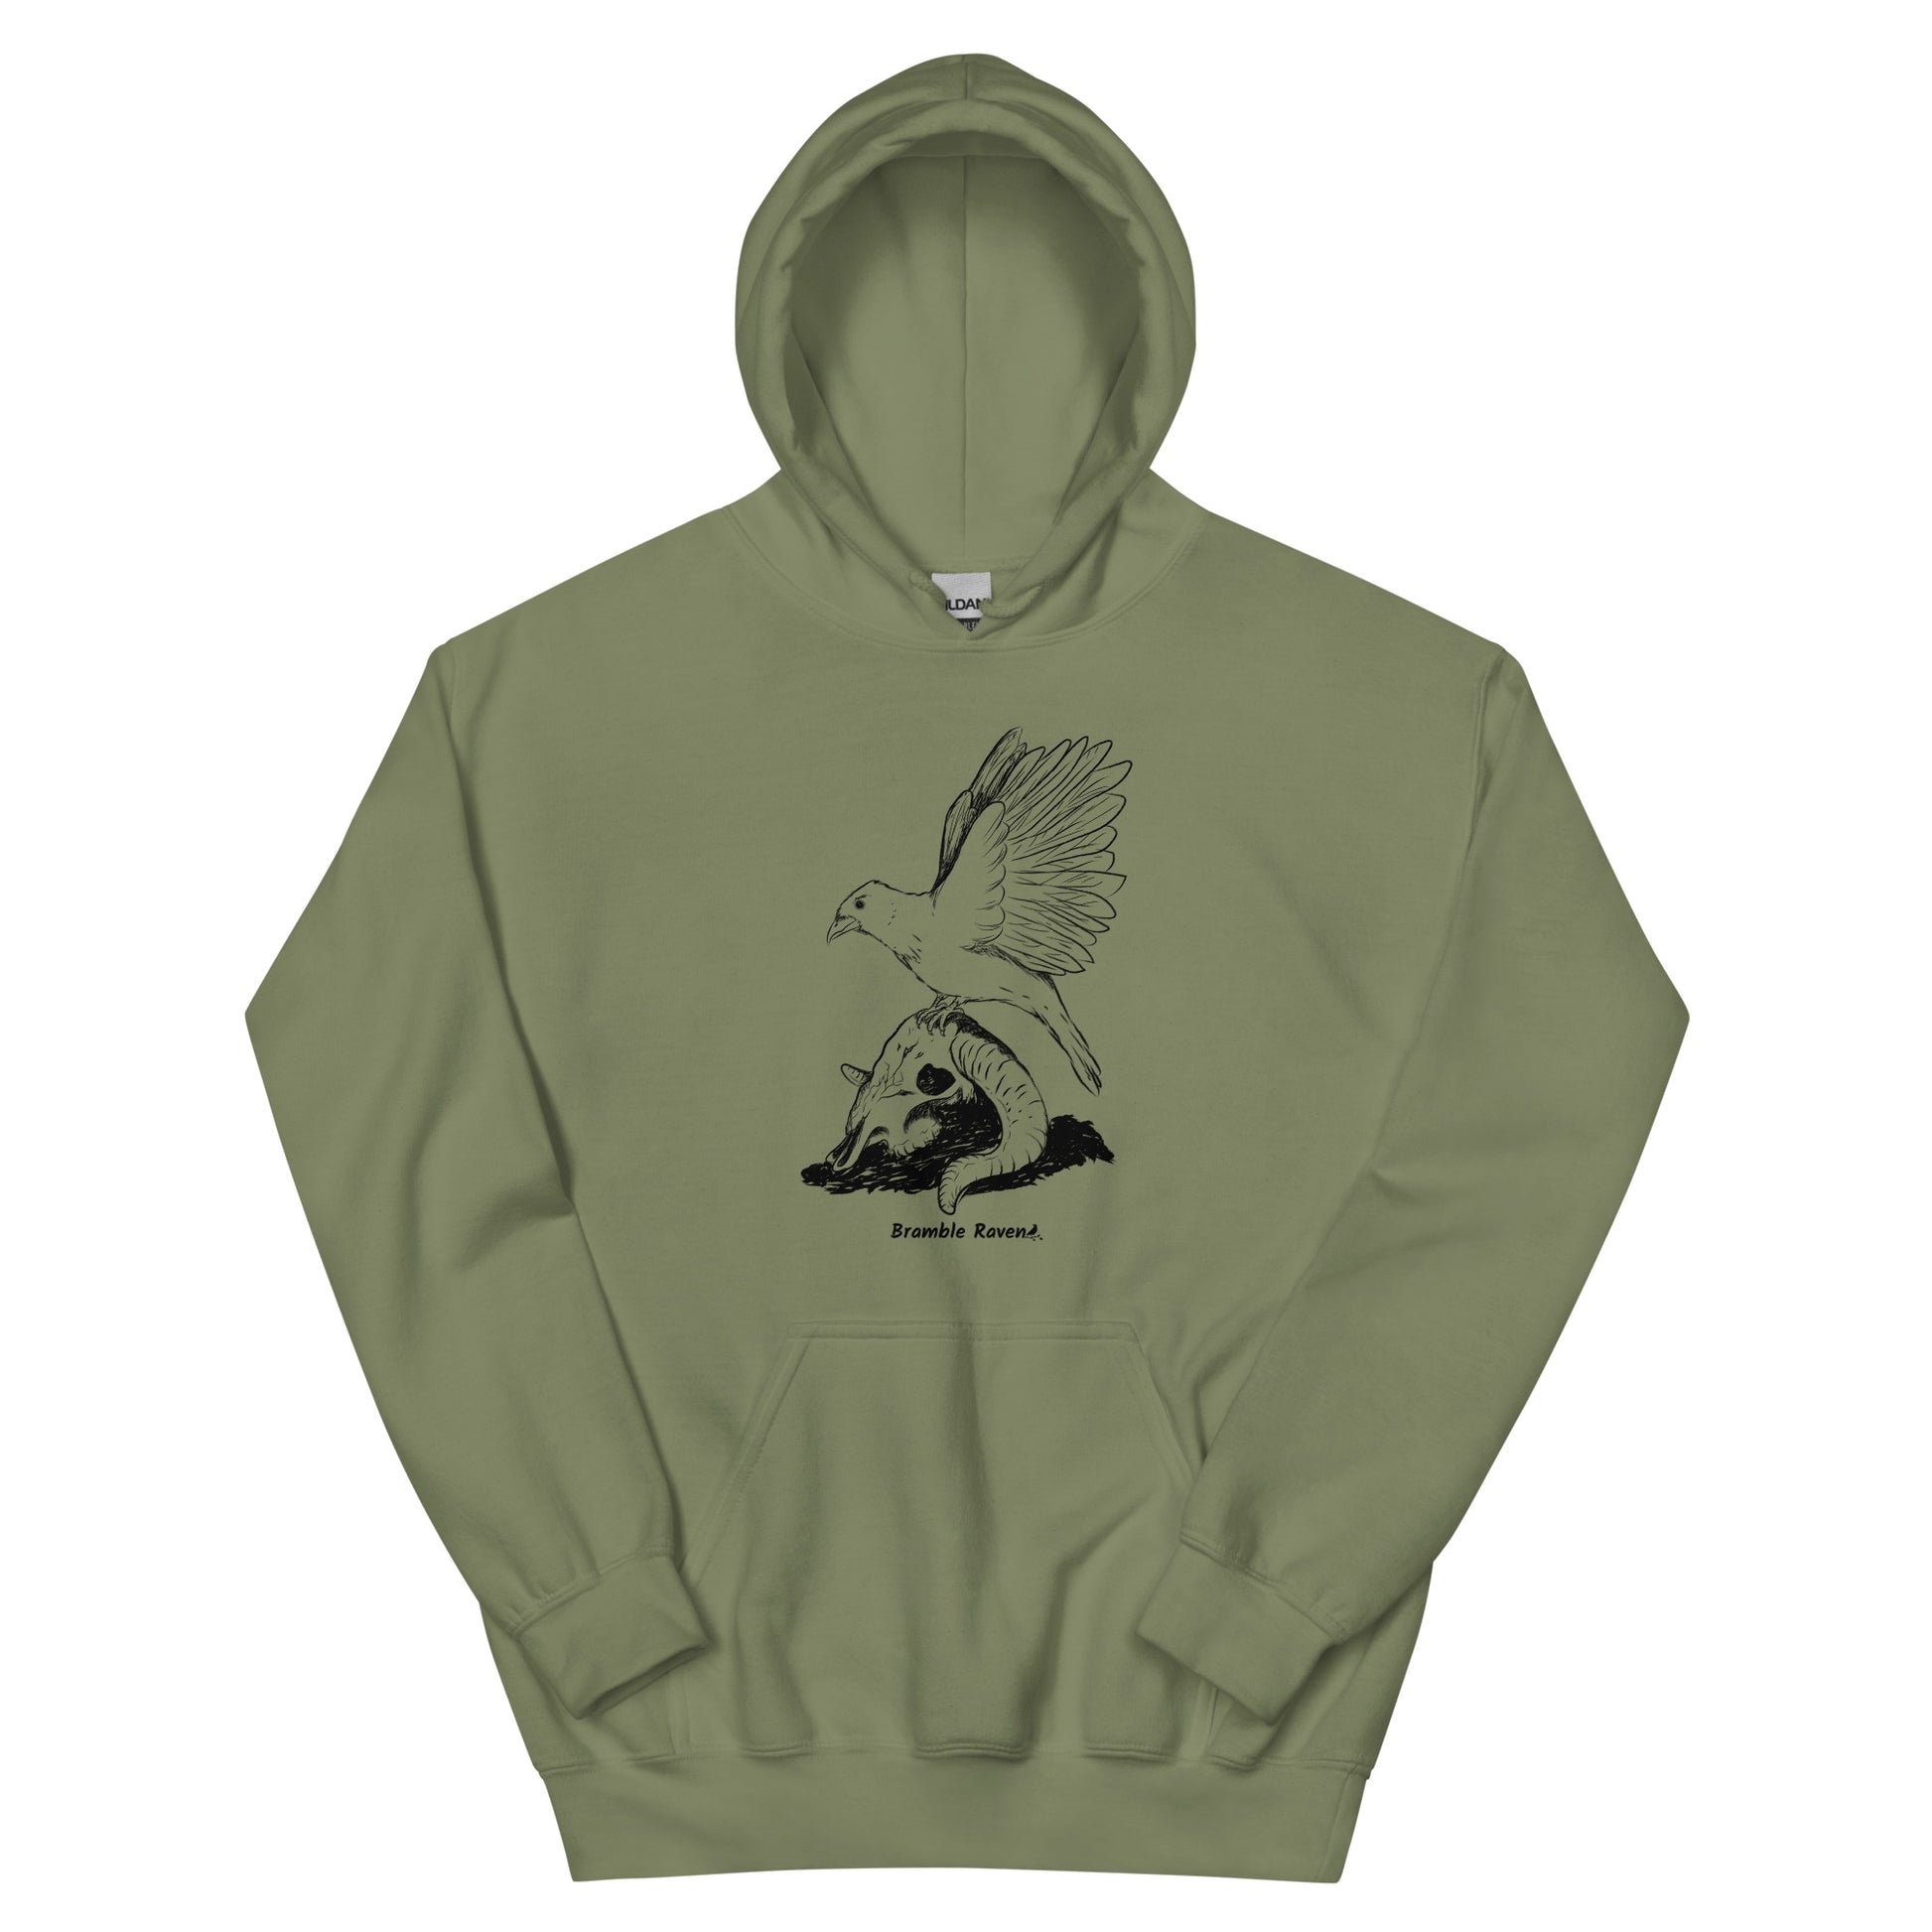 Military green colored unisex Reflections hoodie. Features image of a crow with wings outstretched sitting on a sheep skull.  Has a front pouch pocket and double lined hood.